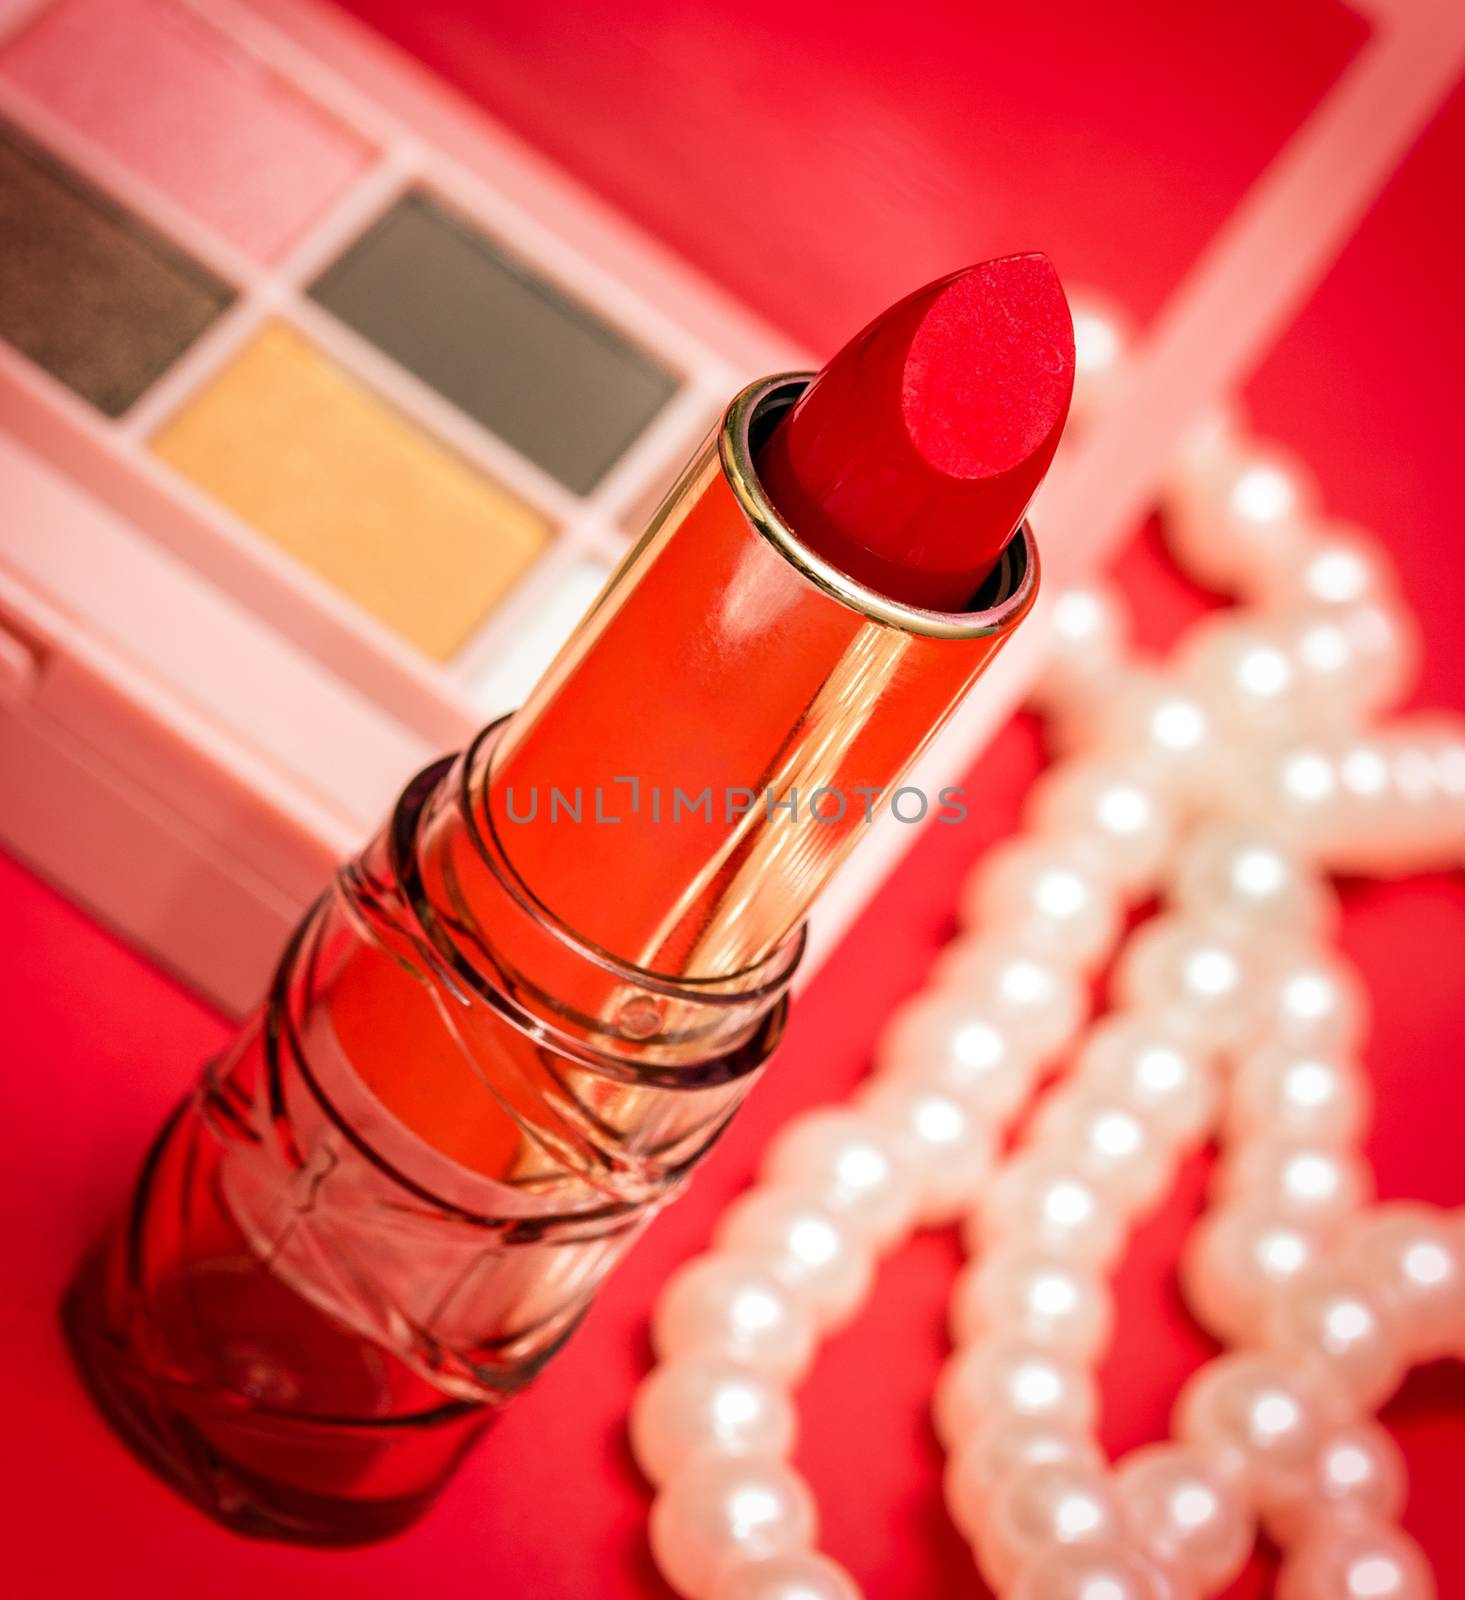 Cosmetics Lipstick Shows Make Ups And Beauty  by stuartmiles